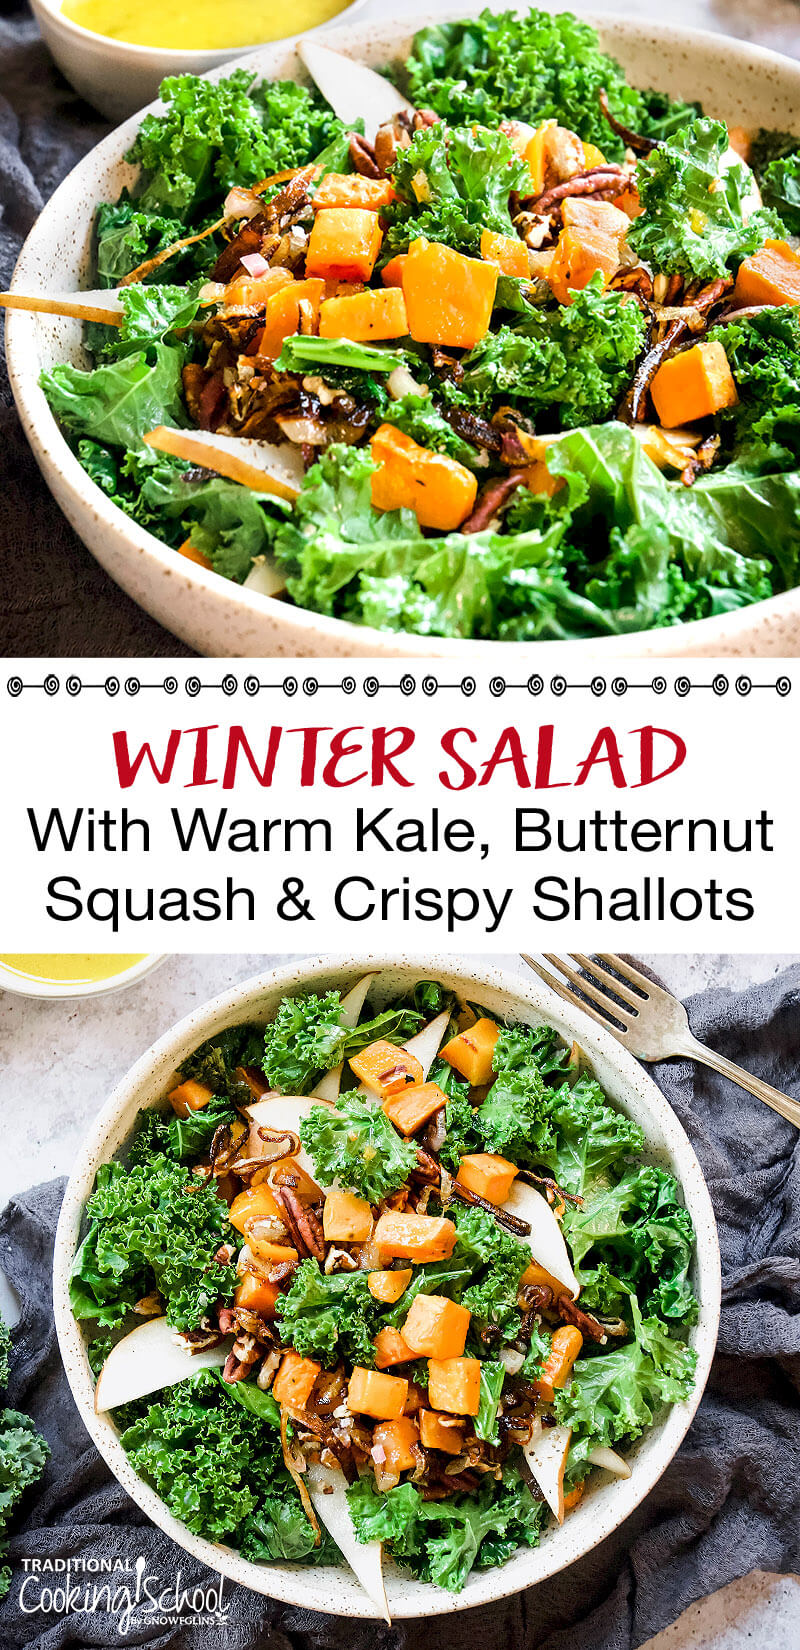 photo collage of a salad of warm kale and roasted winter veggies, with text overlay: "Winter Salad With Warm Kale, Butternut Squash & Crispy Shallots"